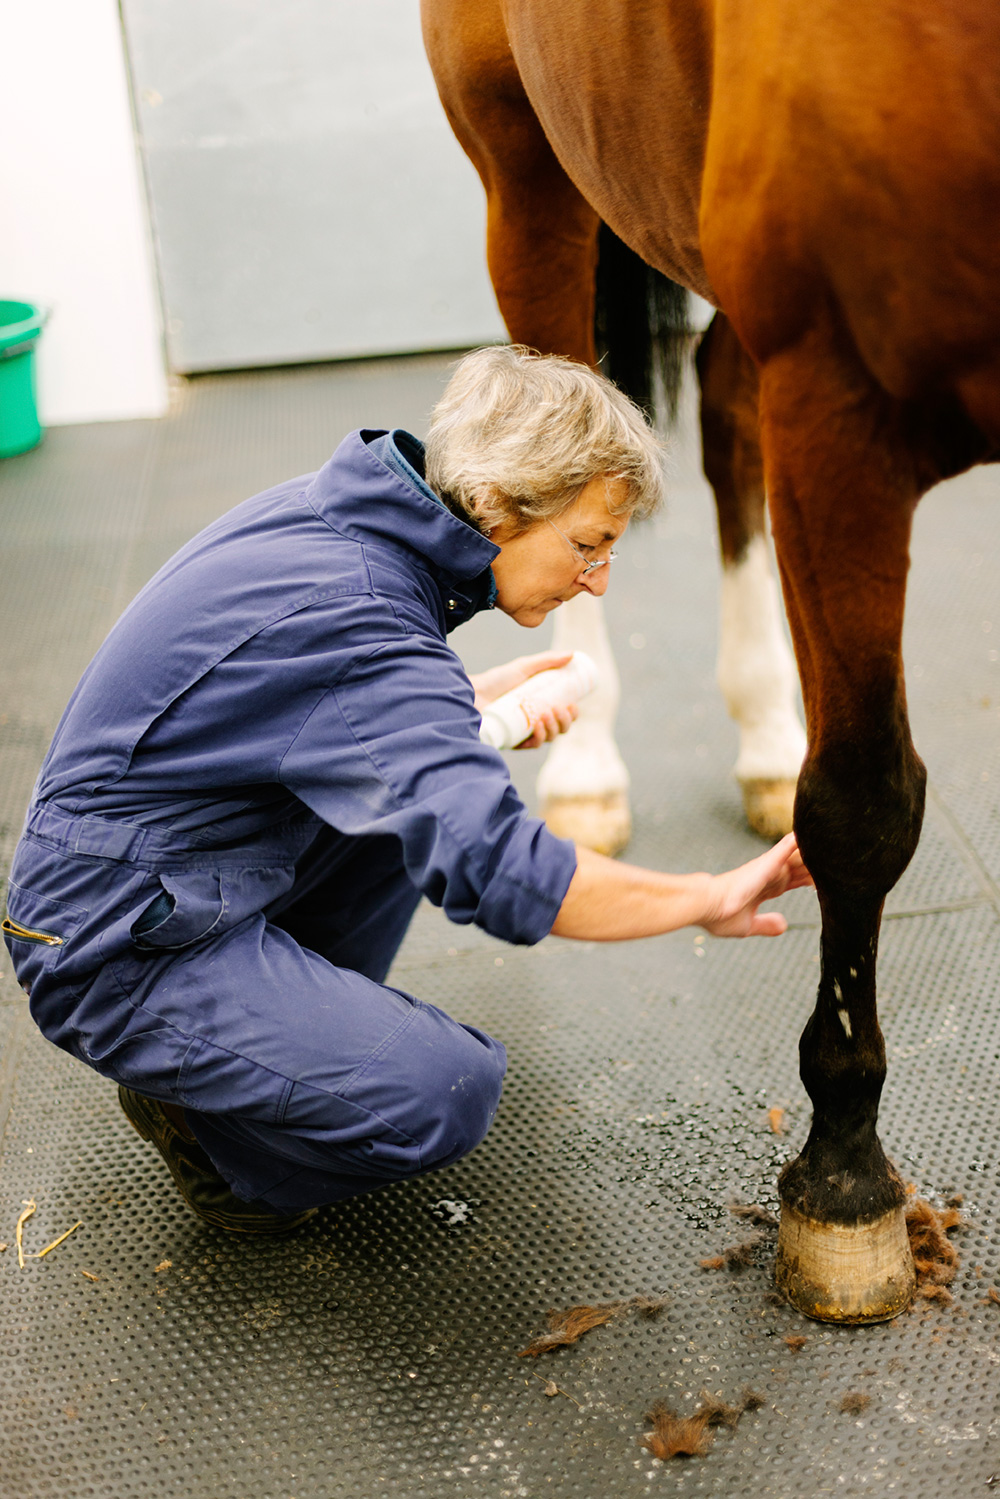 treating injured horse using hymed products